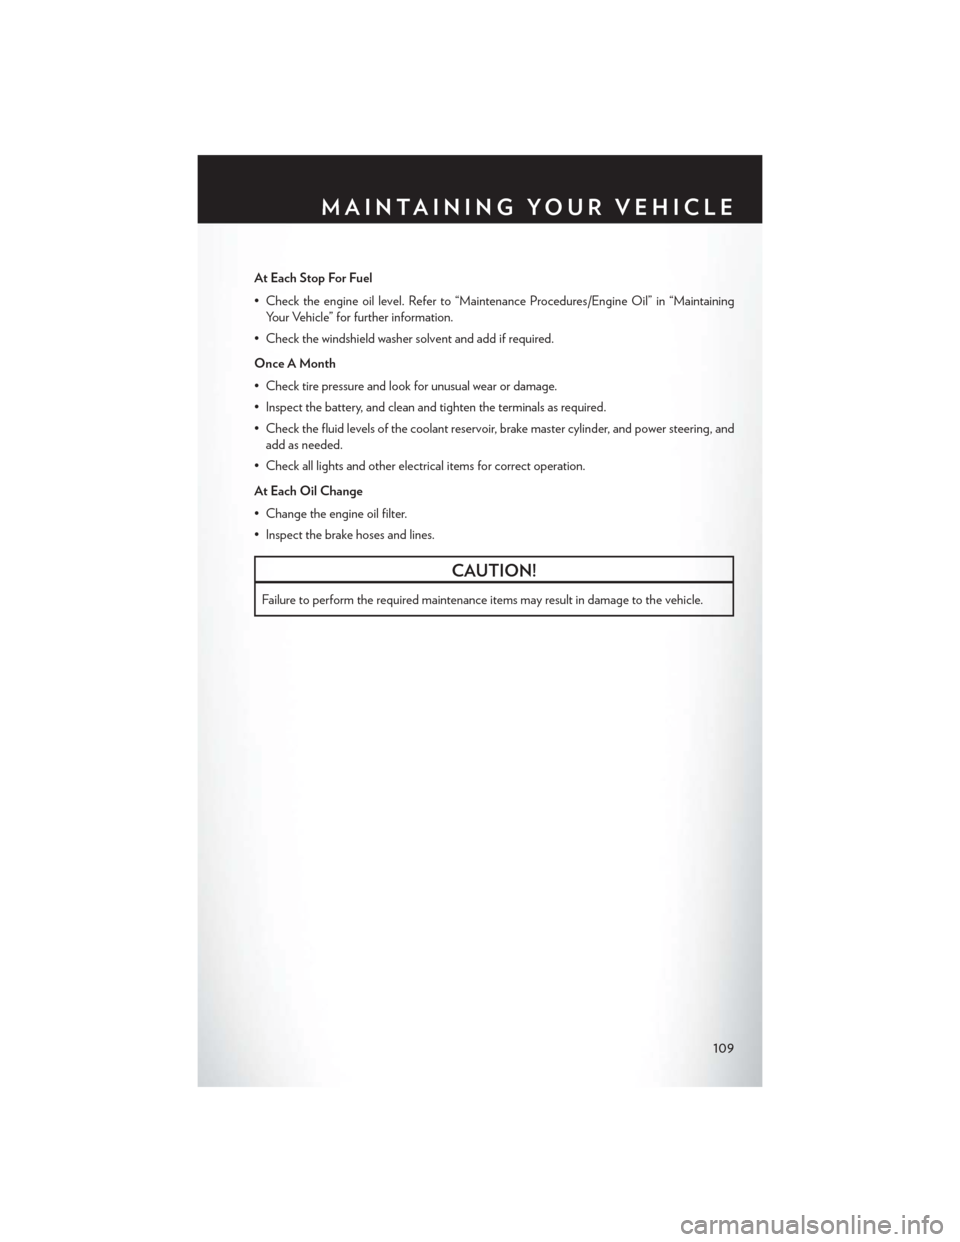 CHRYSLER 300 SRT 2014 2.G User Guide At Each Stop For Fuel
• Check the engine oil level. Refer to “Maintenance Procedures/Engine Oil” in “MaintainingYour Vehicle” for further information.
• Check the windshield washer solvent